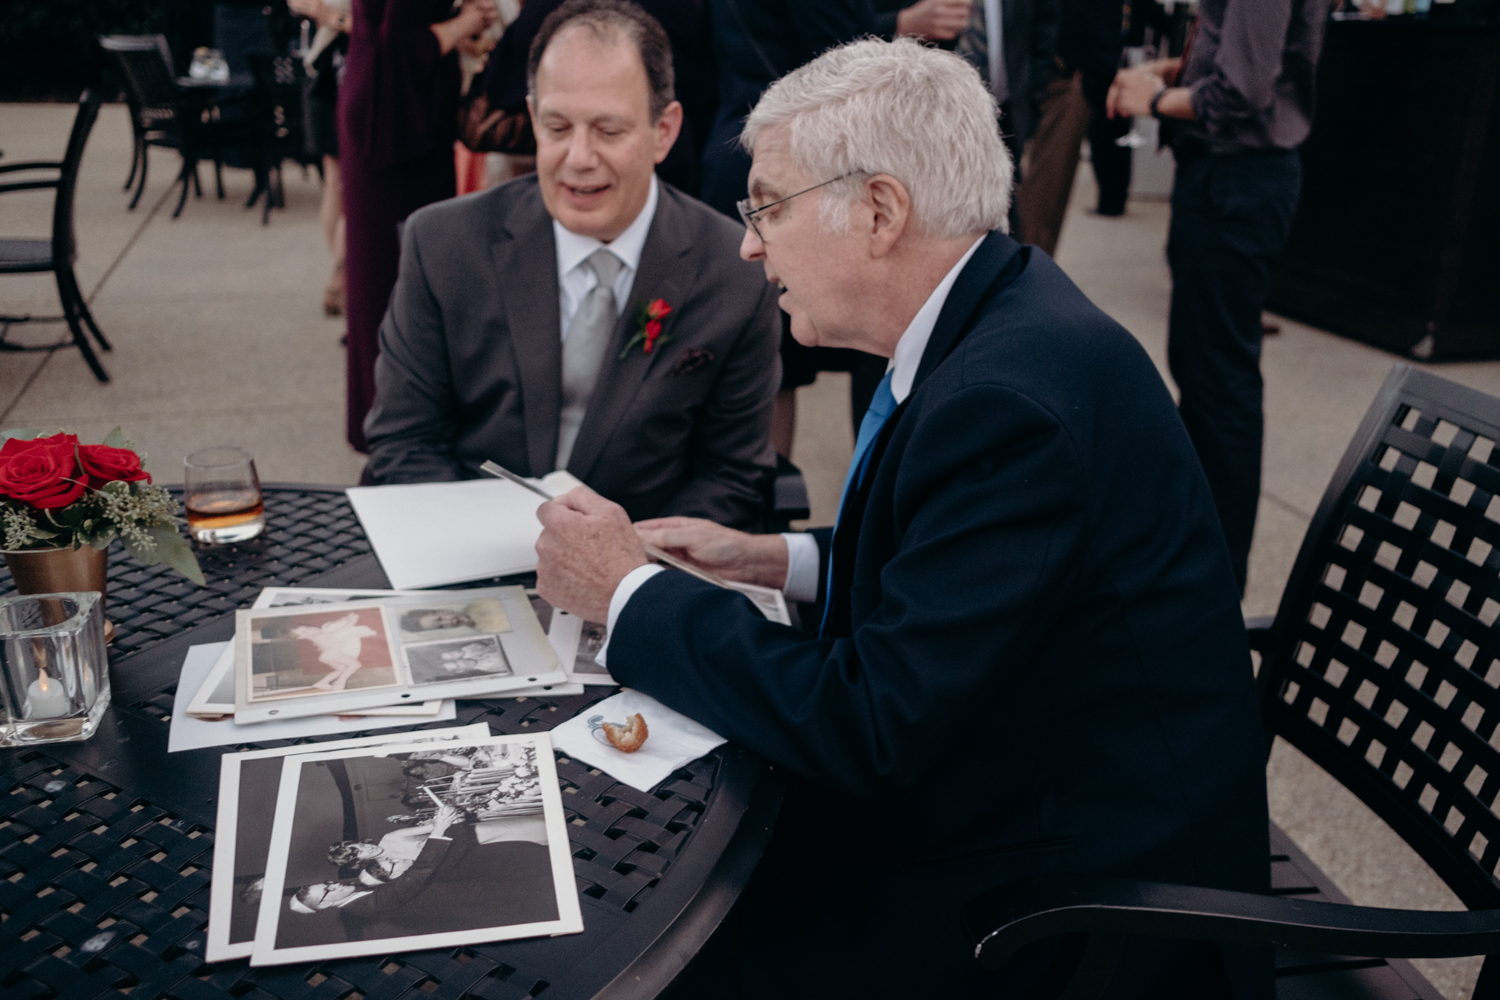 father of groom and guests look at old wedding photos during cocktail hour